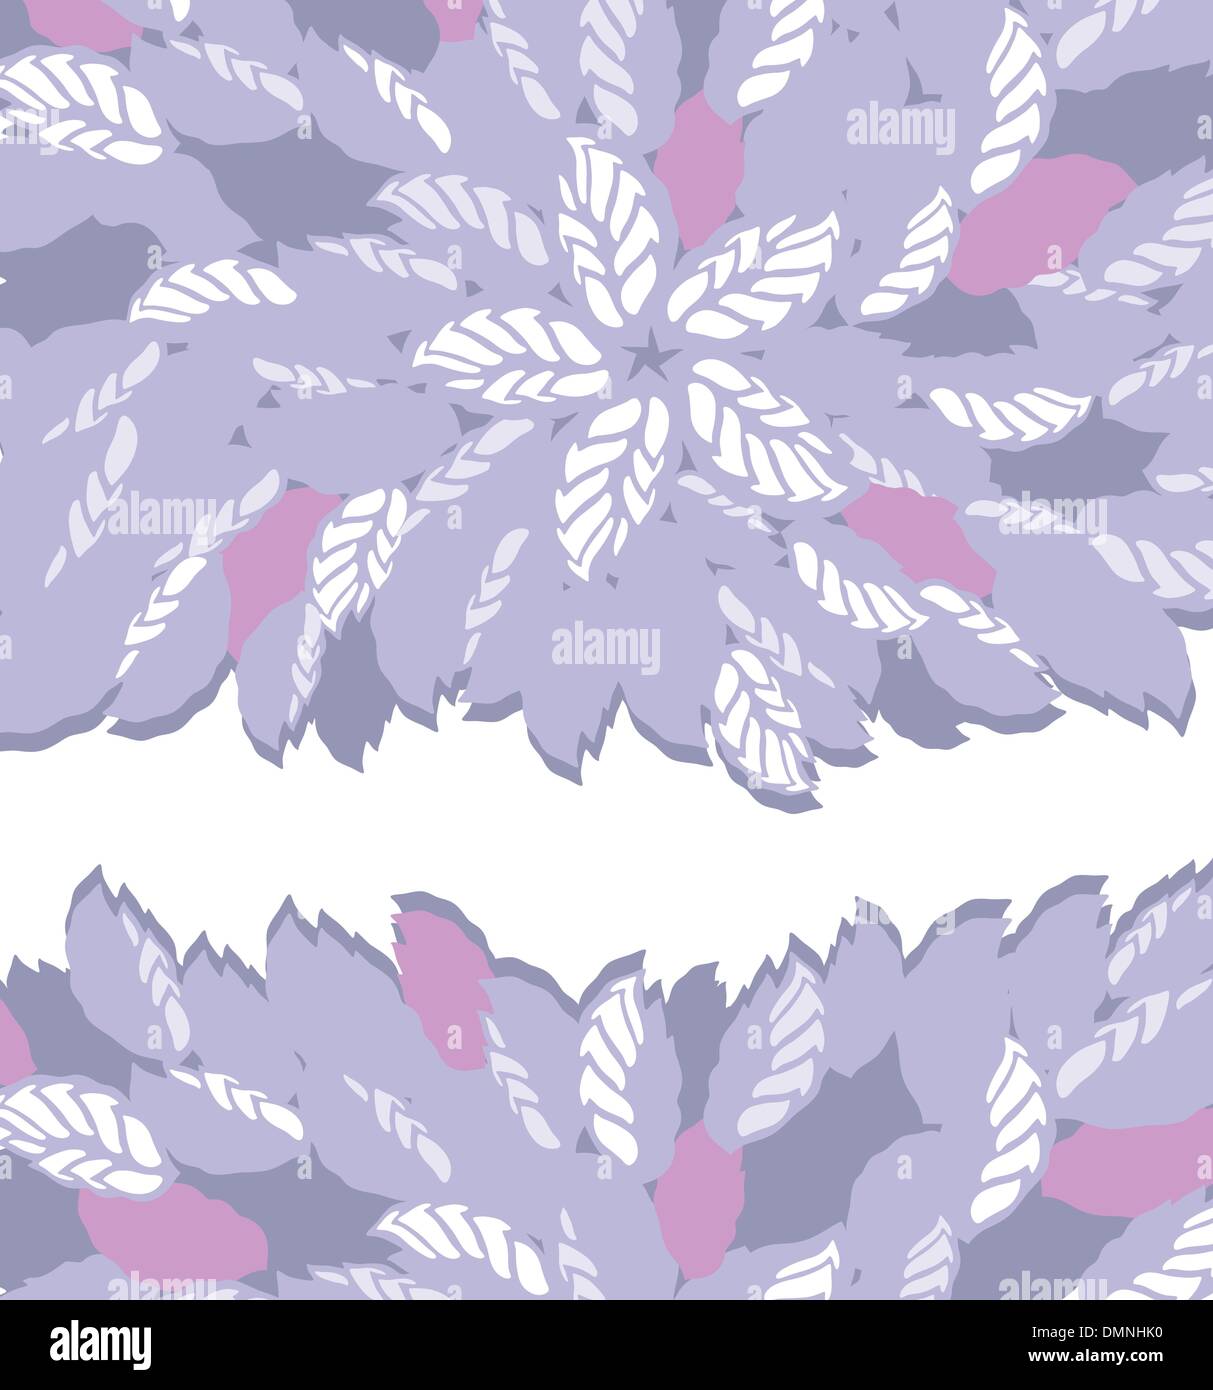 Purple and pink flower and leaves borders Stock Vector